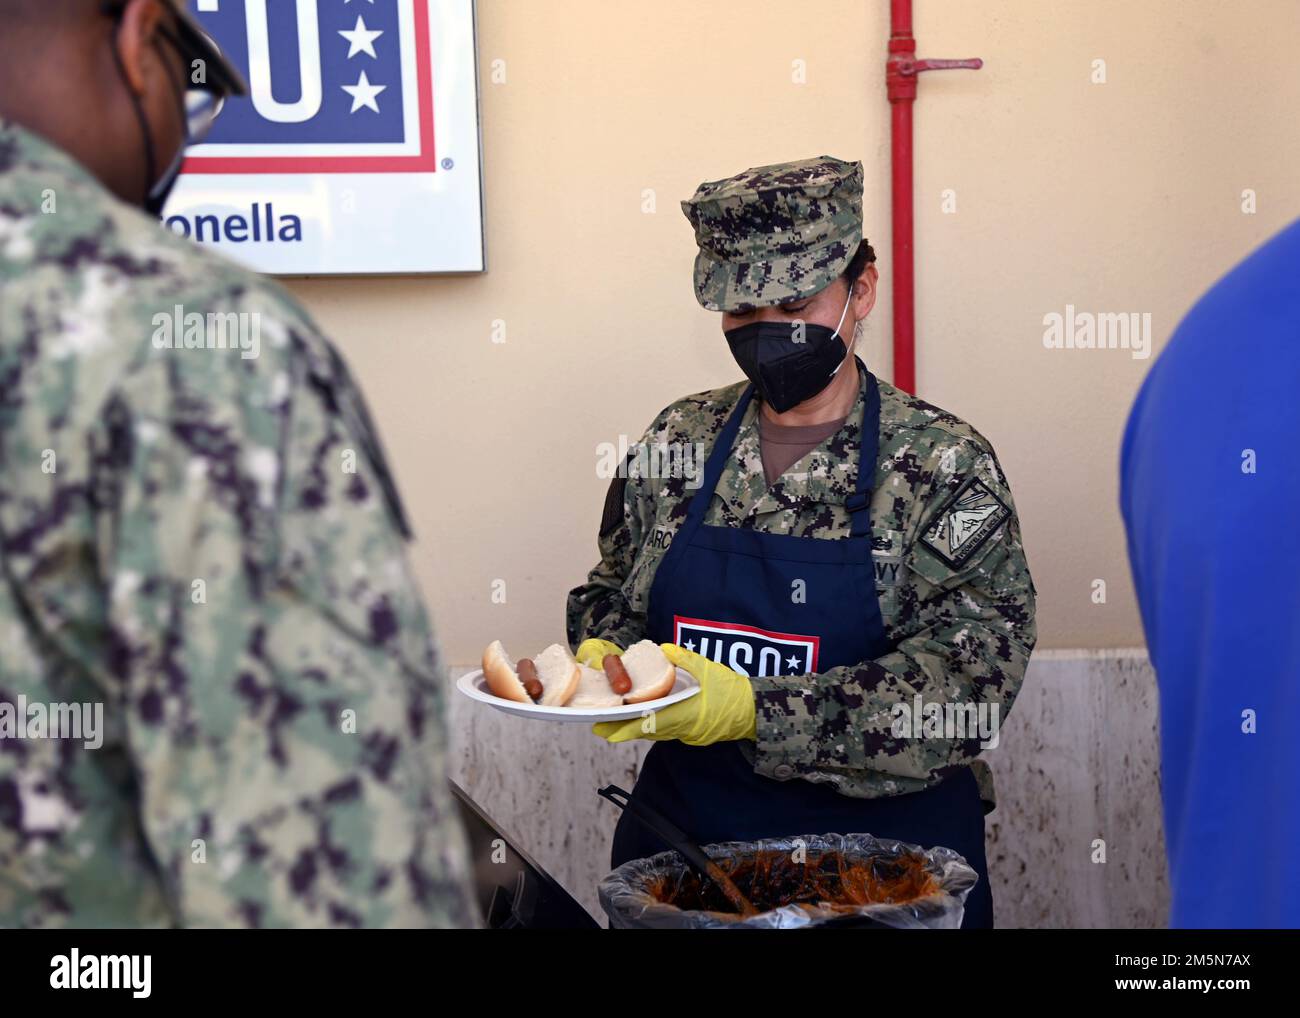 220329-N-OX321-1003 NAVAL AIR STATION SIGONELLA, Italy (March 29, 2022) – Chief Engineman Ofelia Garcia from Houston serves lunch at the USO Troop Lunch to help raise awareness for the Chief’s Birthday at Naval Air Station Sigonella on March 29, 2022. NAS Sigonella’s strategic location enables U.S., allied, and partner nation forces to deploy and respond as required, ensuring security and stability in Europe, Africa, and Central Command. Stock Photo